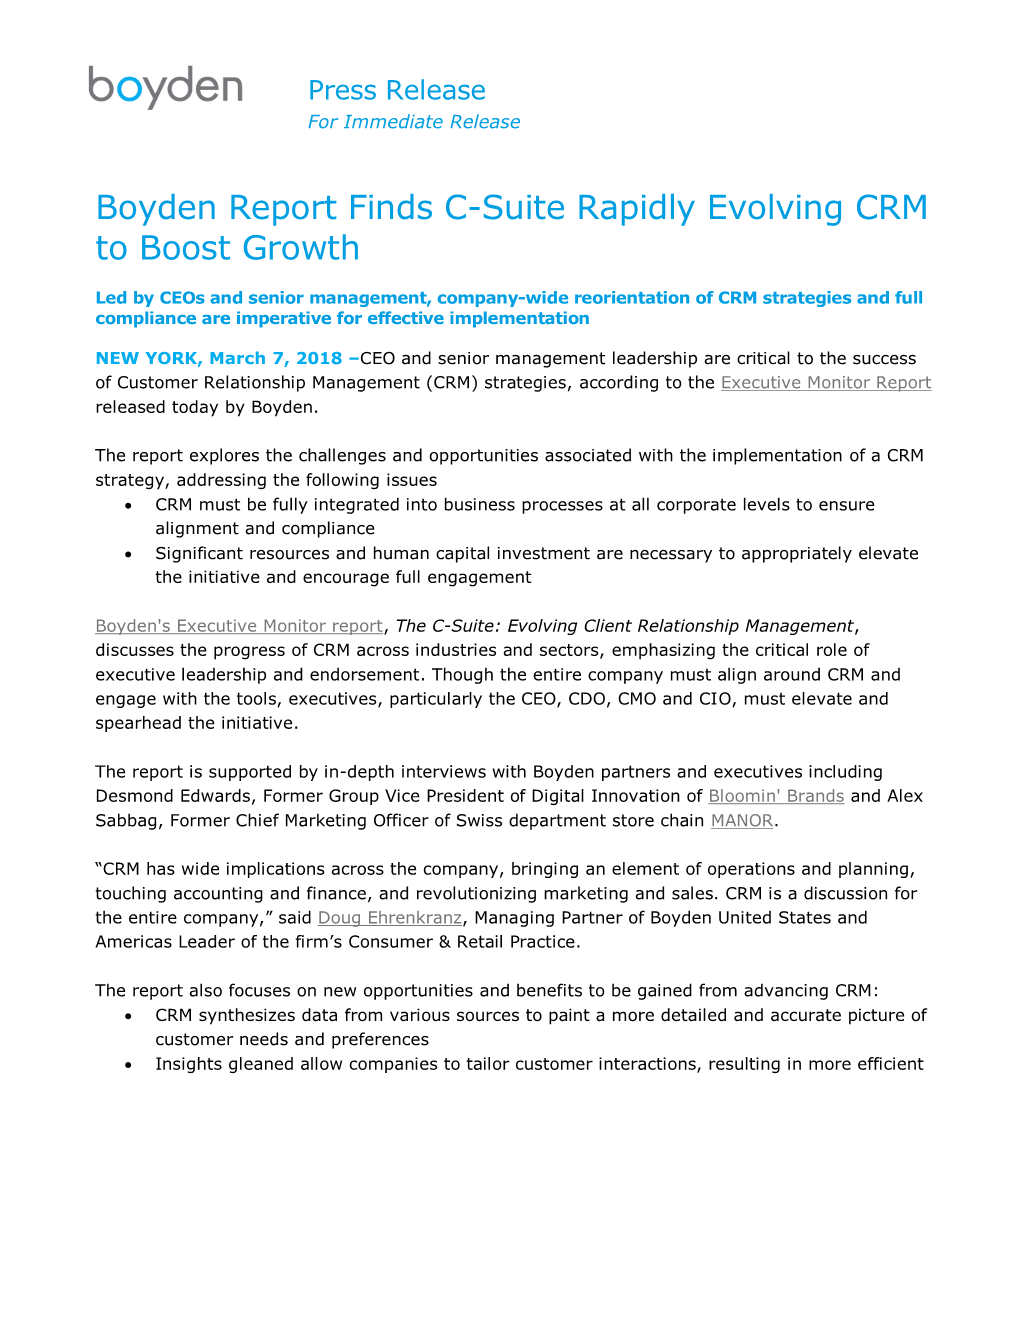 Boyden Report Finds C-Suite Rapidly Evolving CRM to Boost Growth